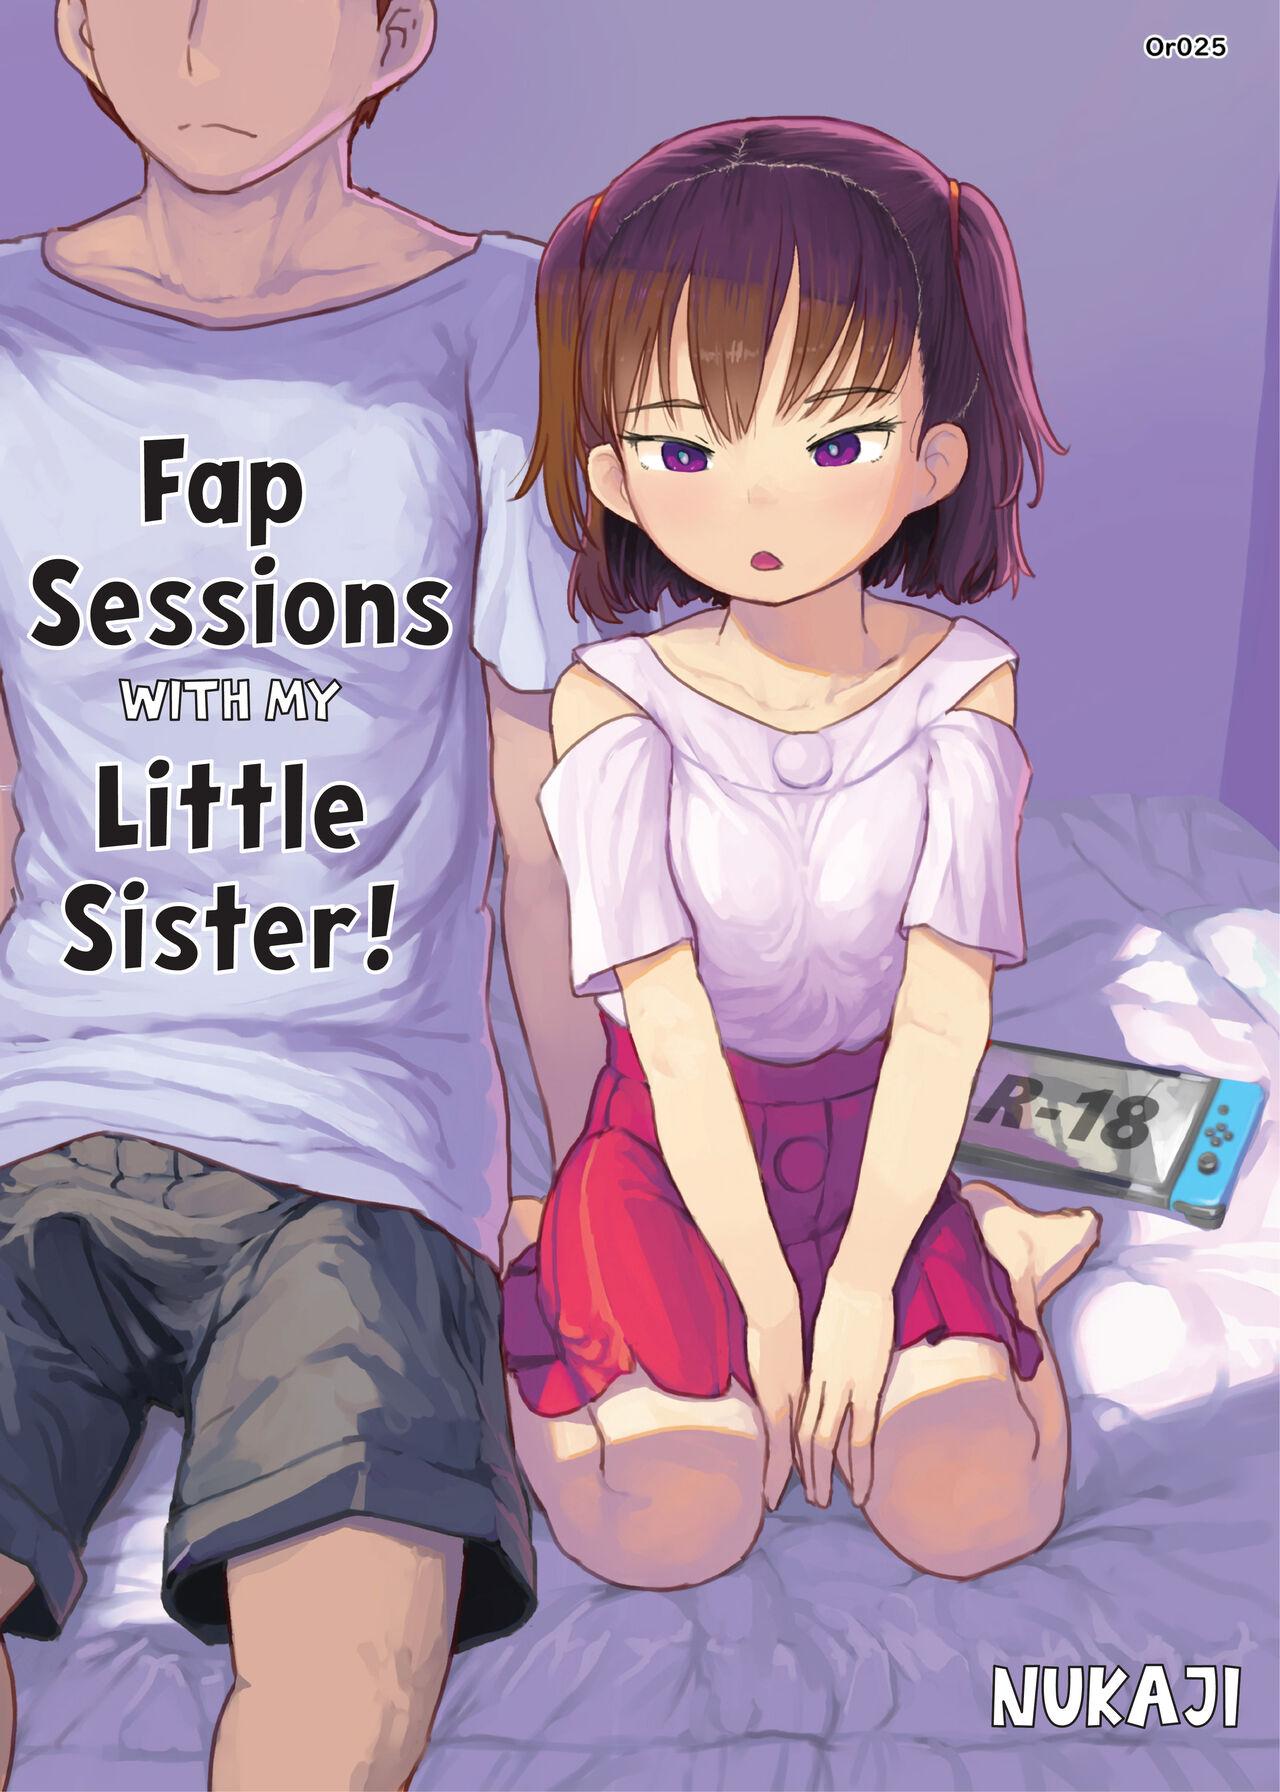 Swingers Imouto to Nuku | Fap Sessions with my Little Sister! - Original Eating - Page 1